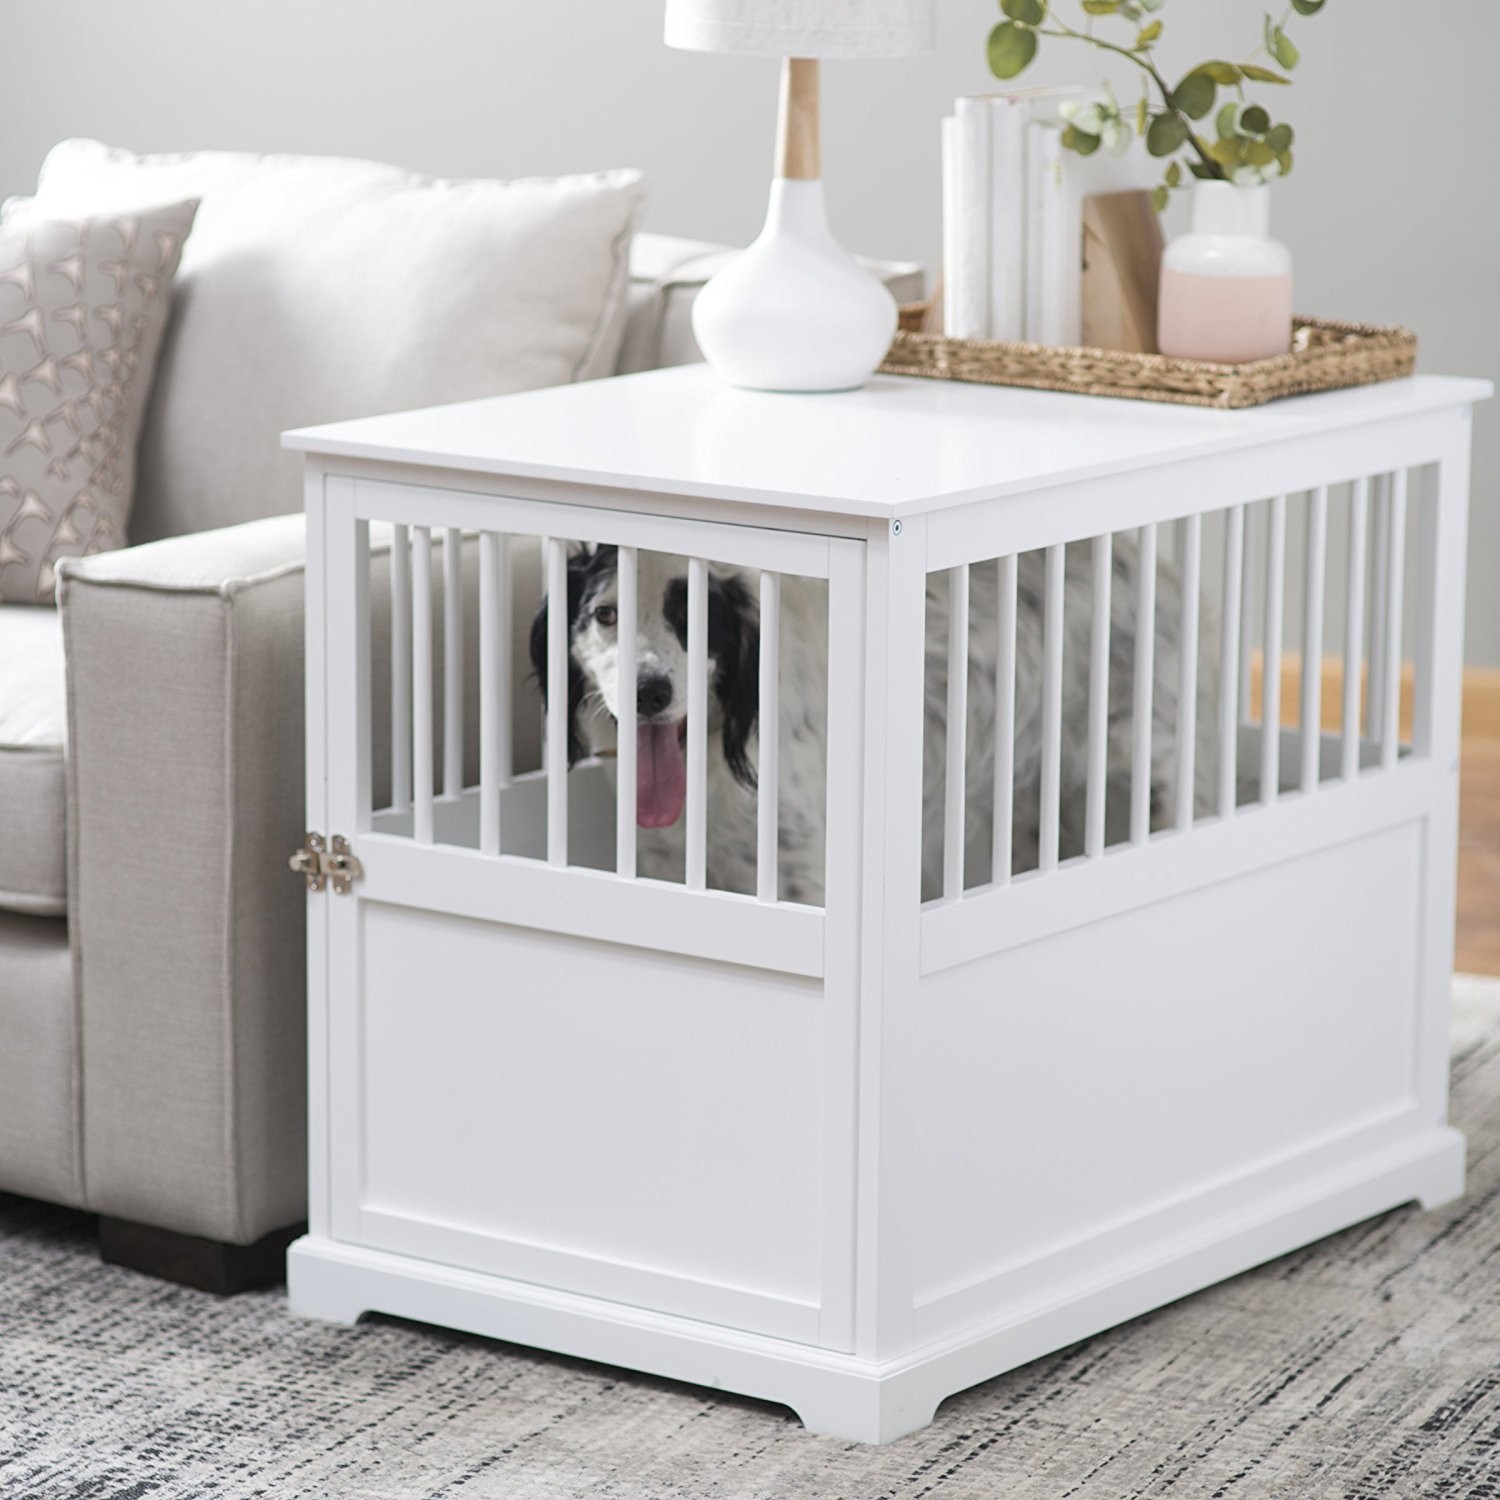 End table dog crate home furniture design 1